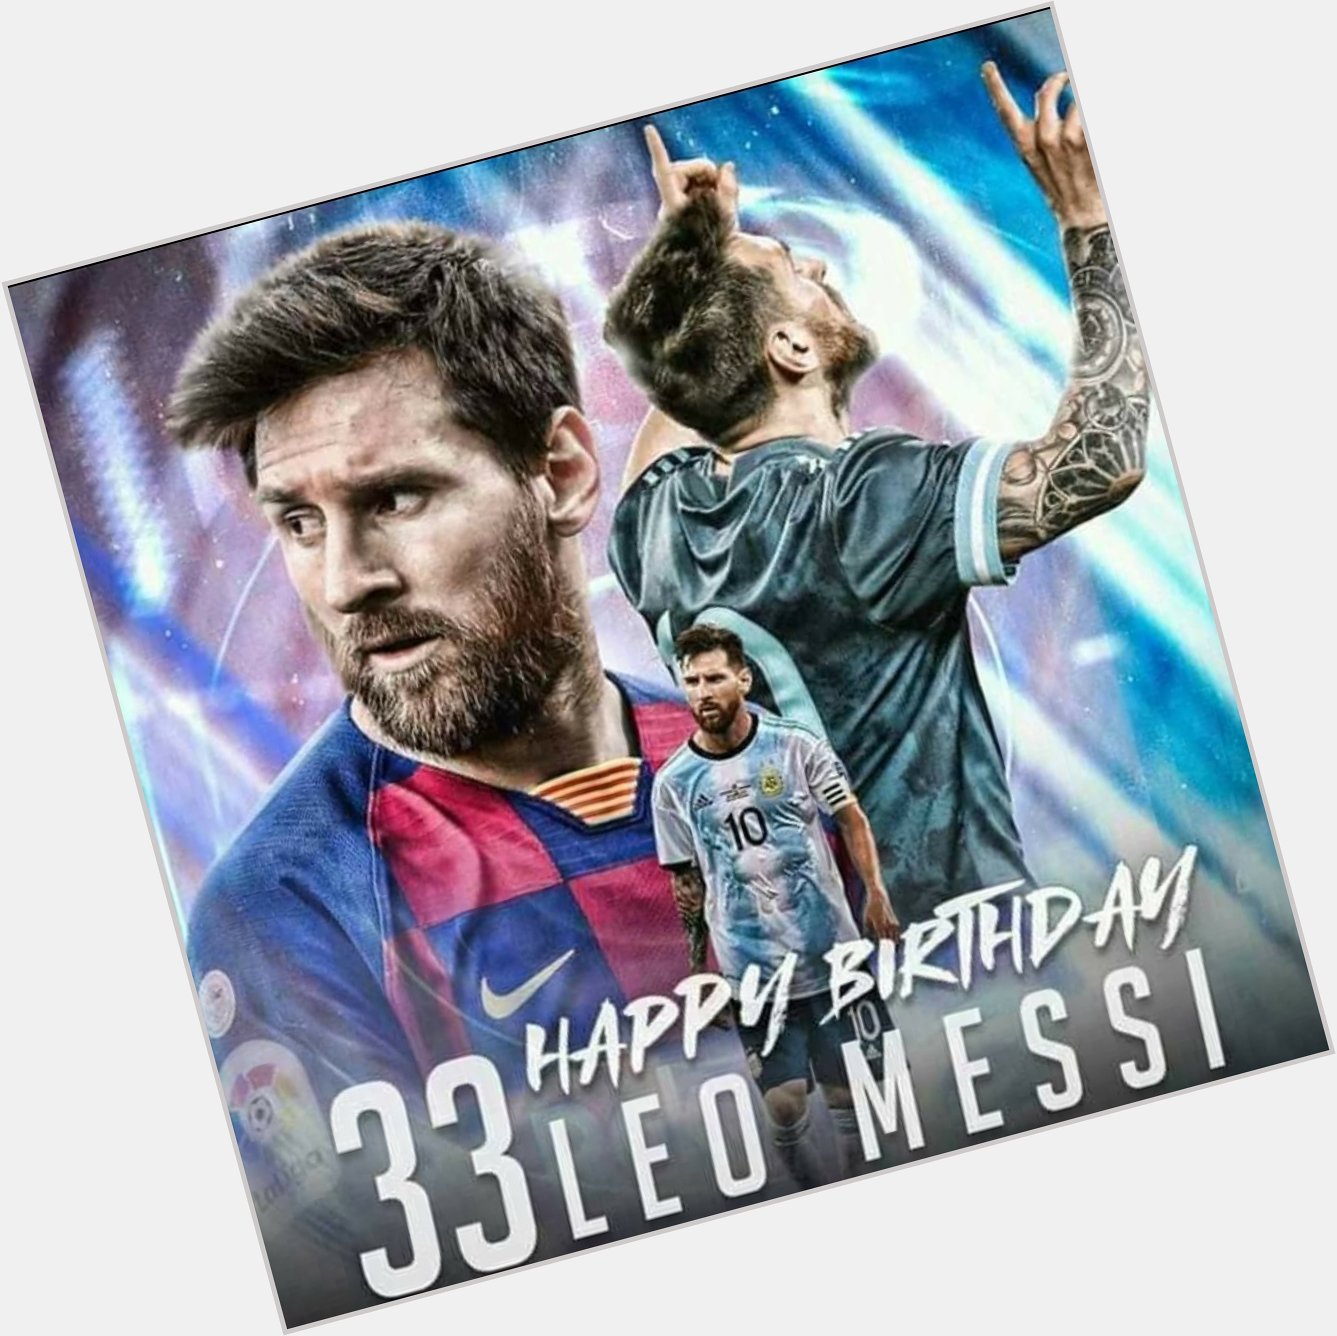 Happy Birthday To The Idol Of Millions Of People, Lionel Messi  